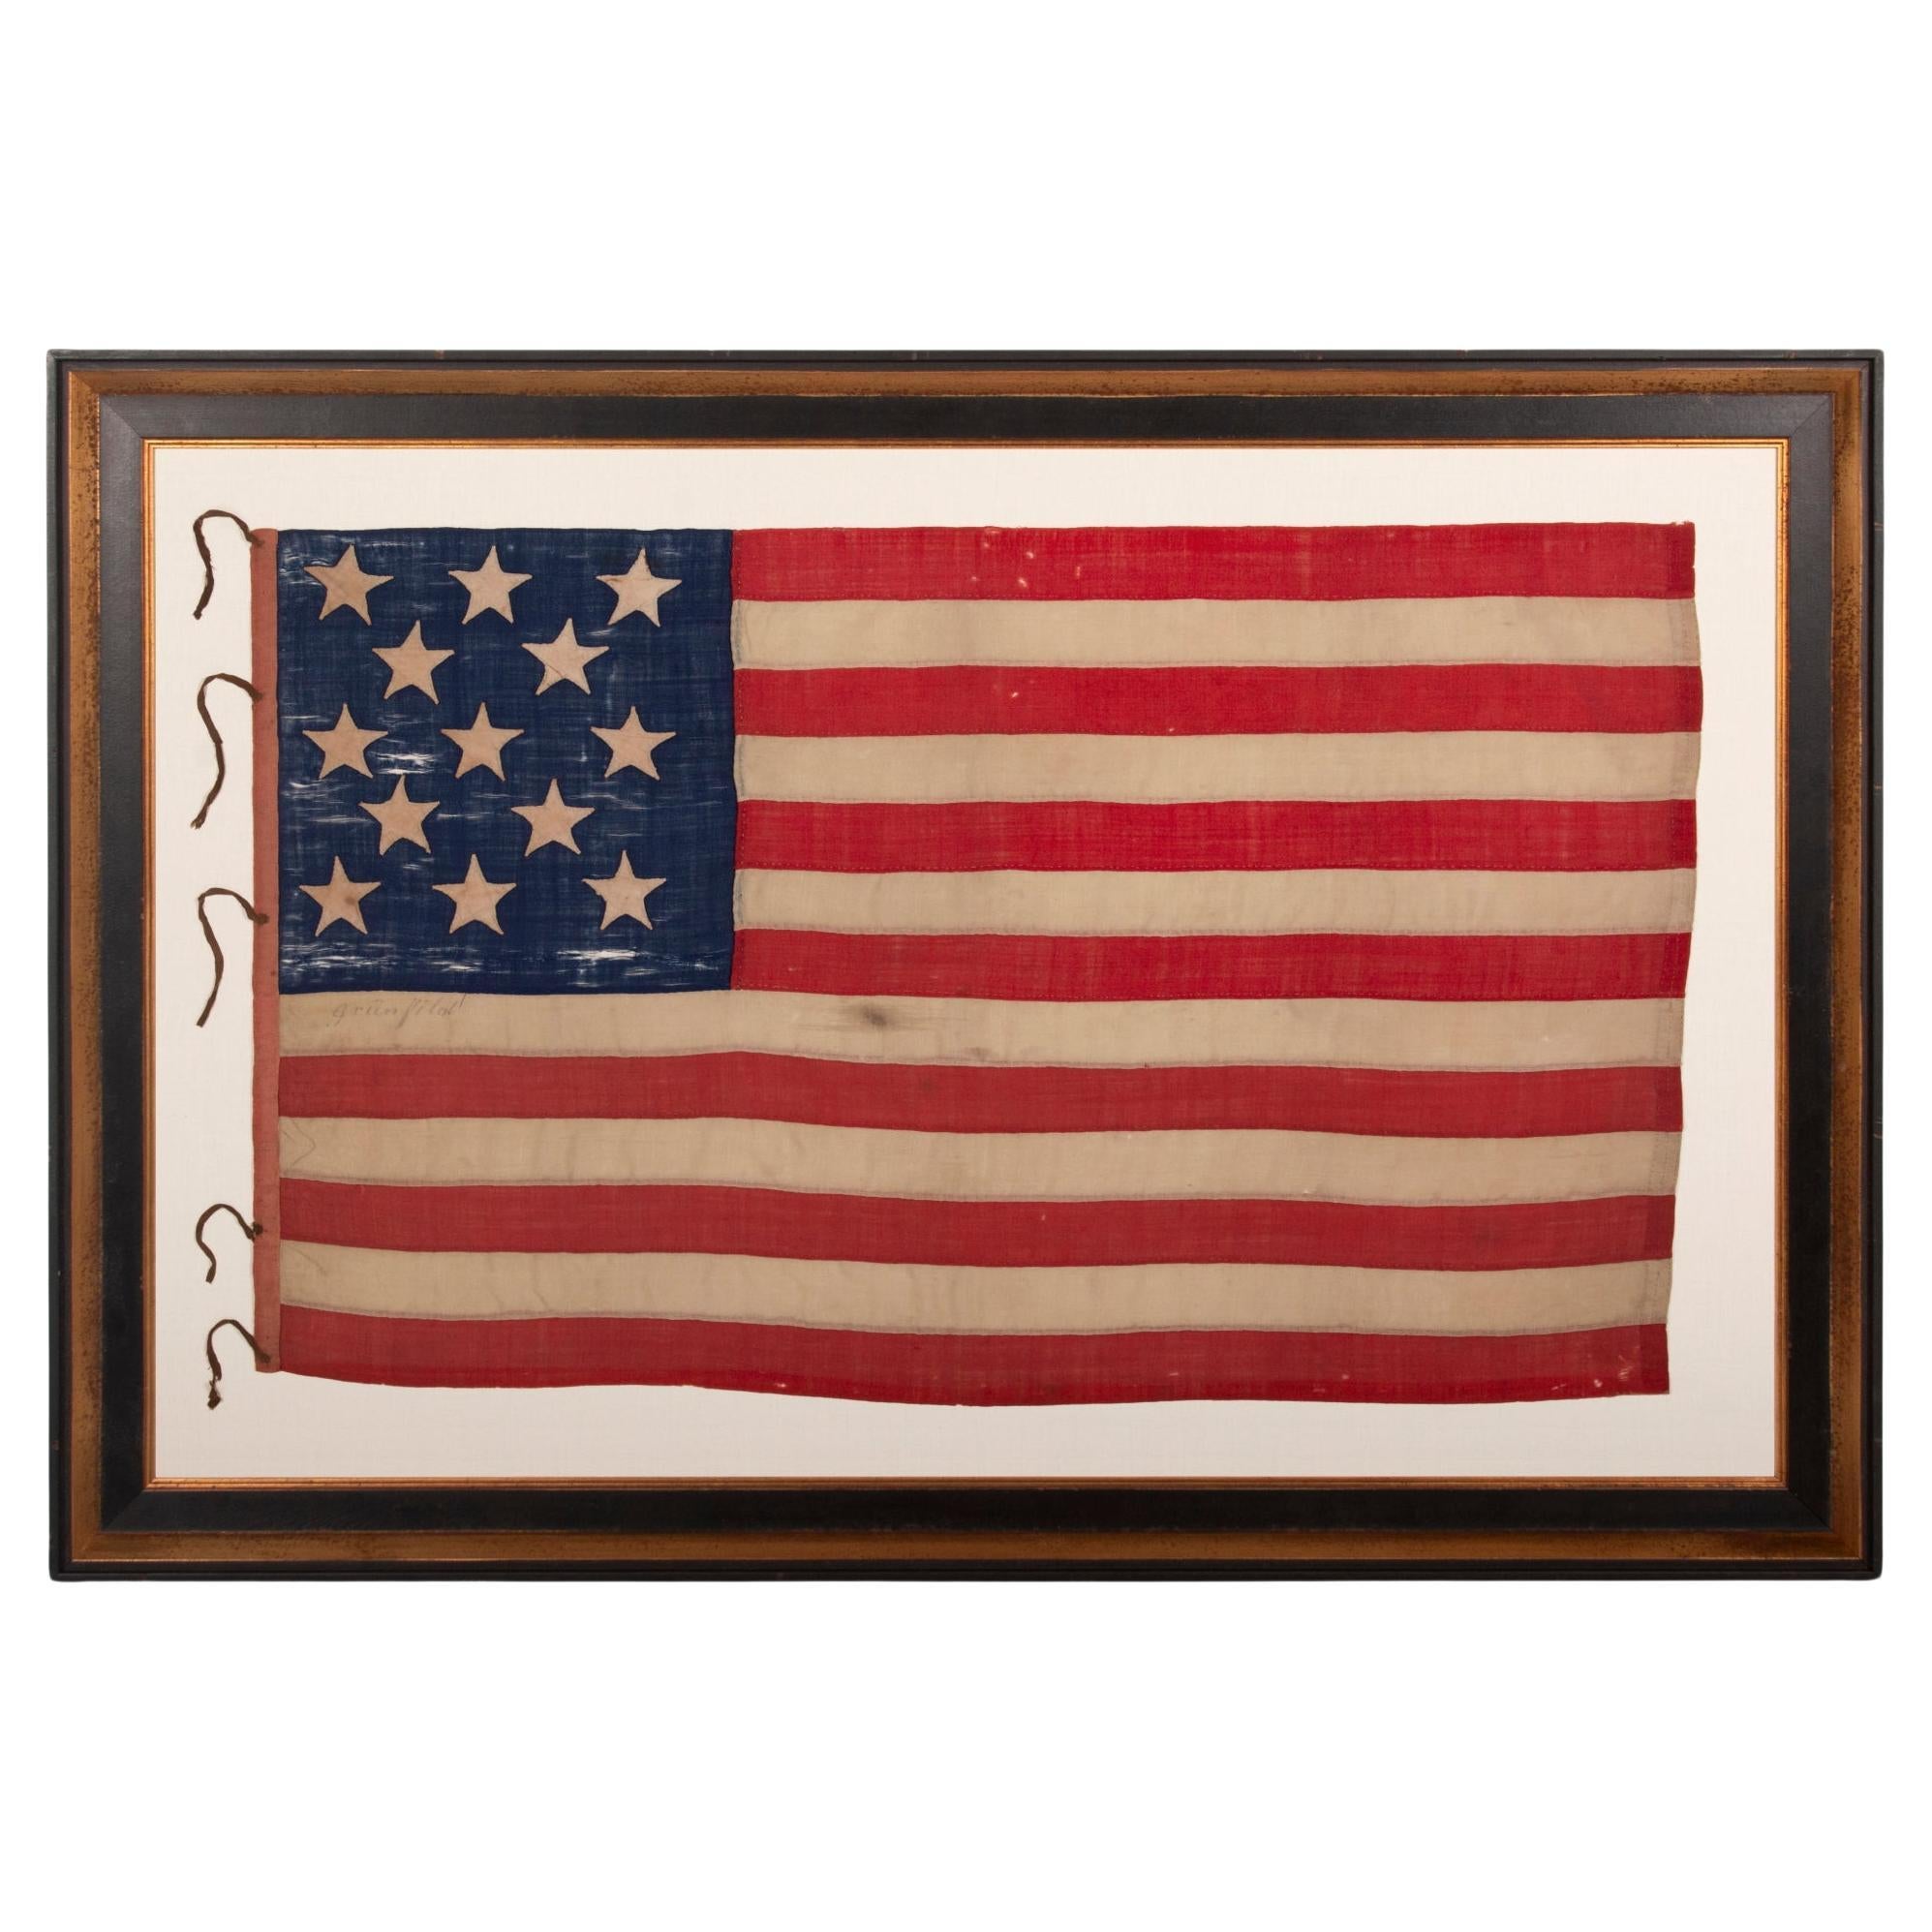 Hand-Sewn 13 Star American Flag, Signed Grunfild, ca 1861-1877 For Sale